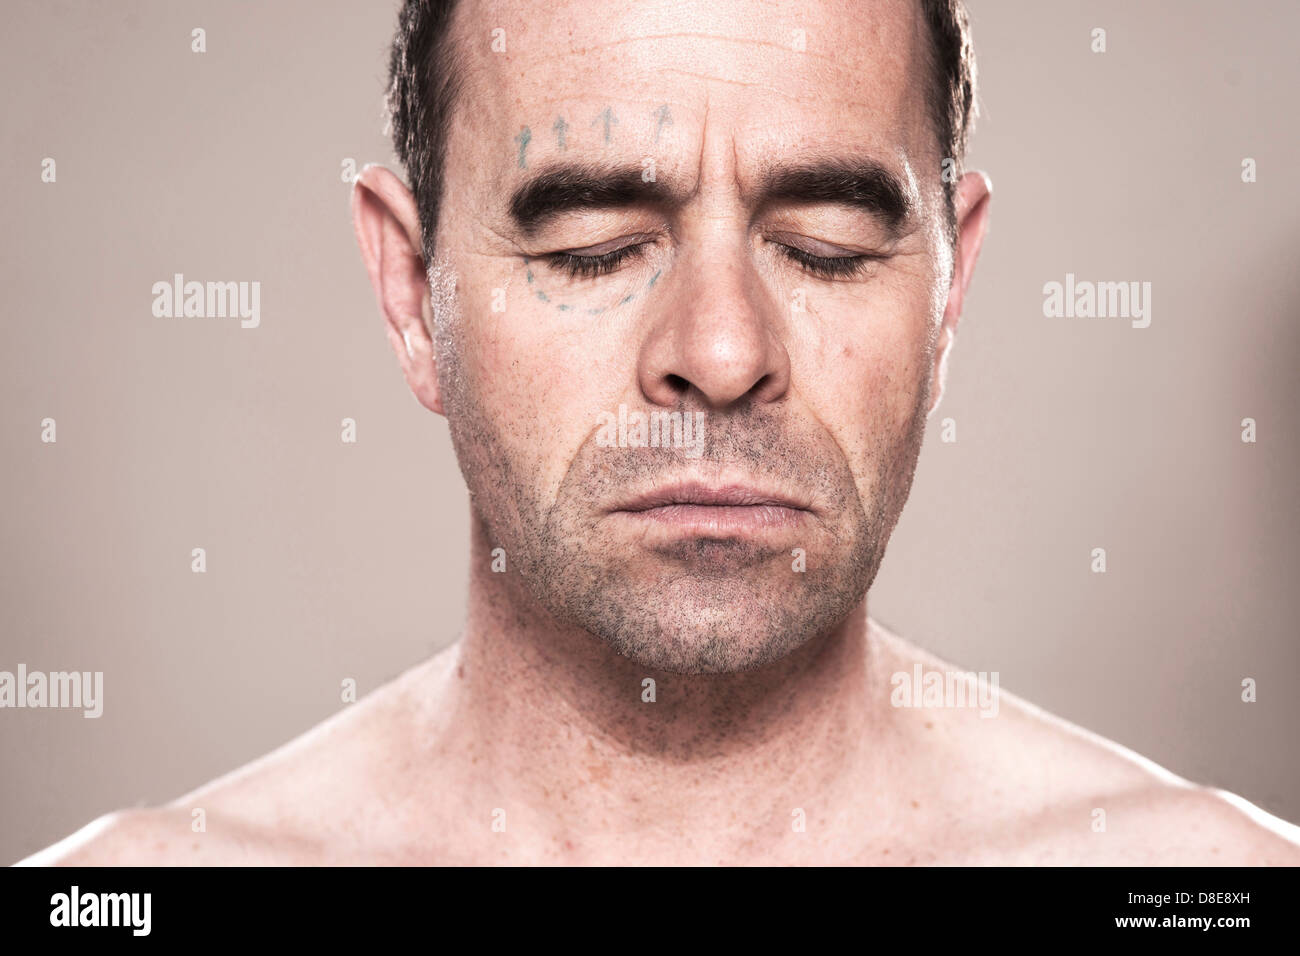 Serious man with closed eyes, close-up Stock Photo